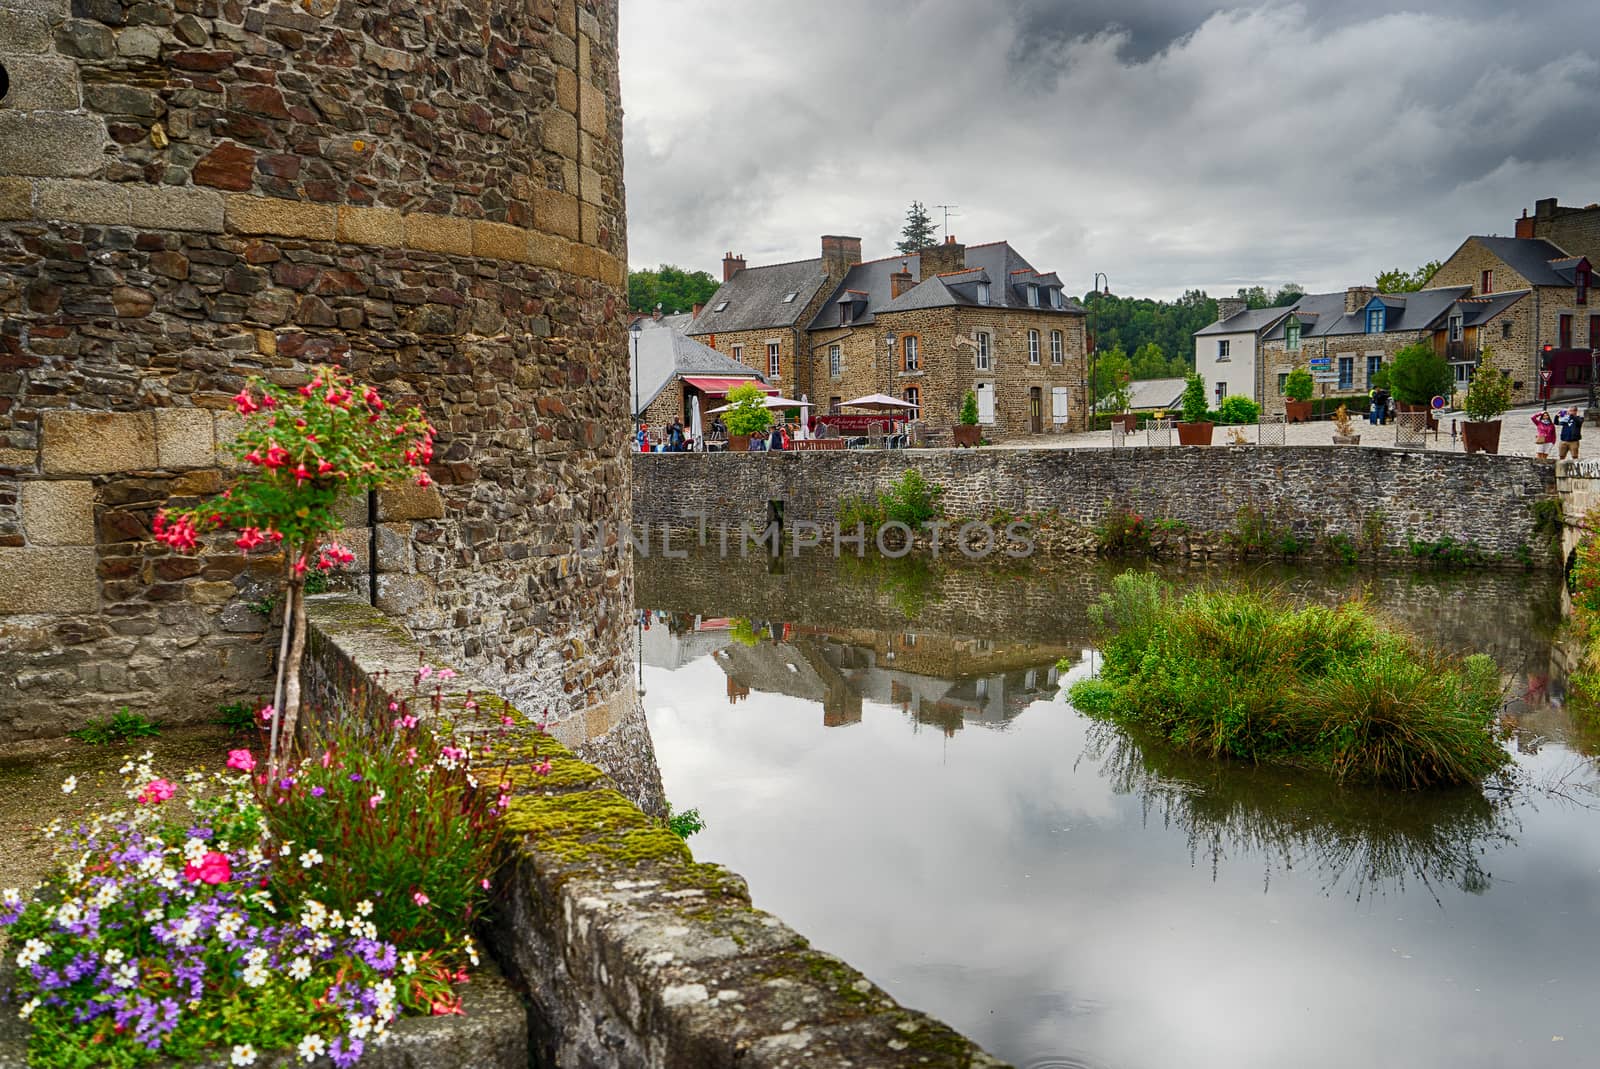 Fougères castle in Normandy tourist attraction by javax